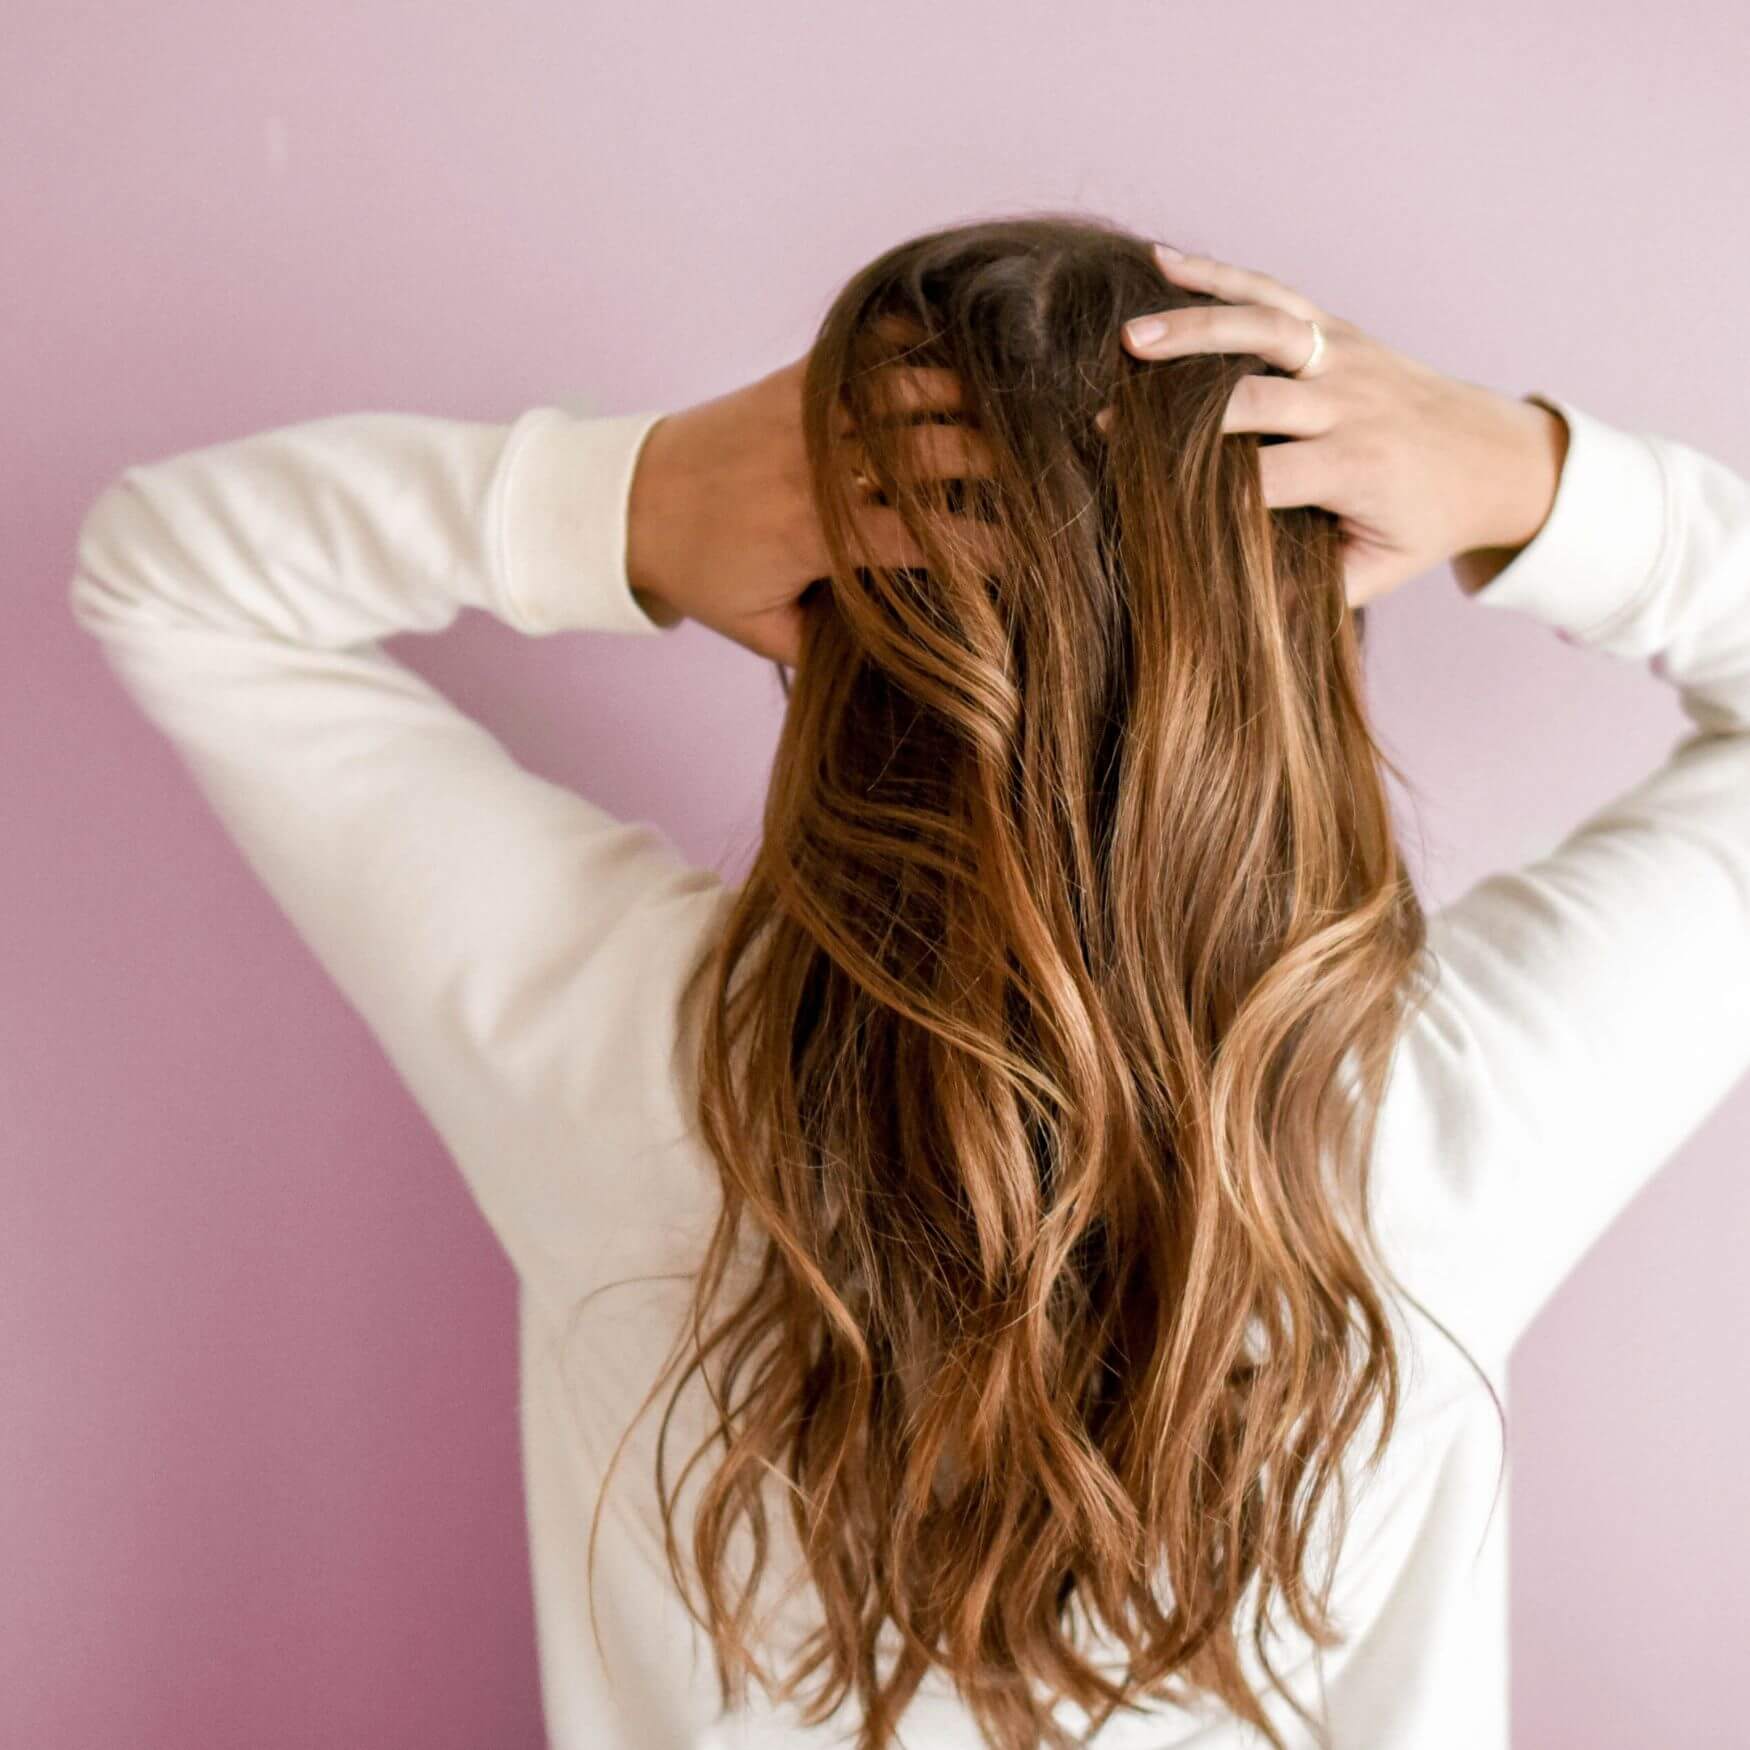 How to Naturally Grow Your Hair Faster